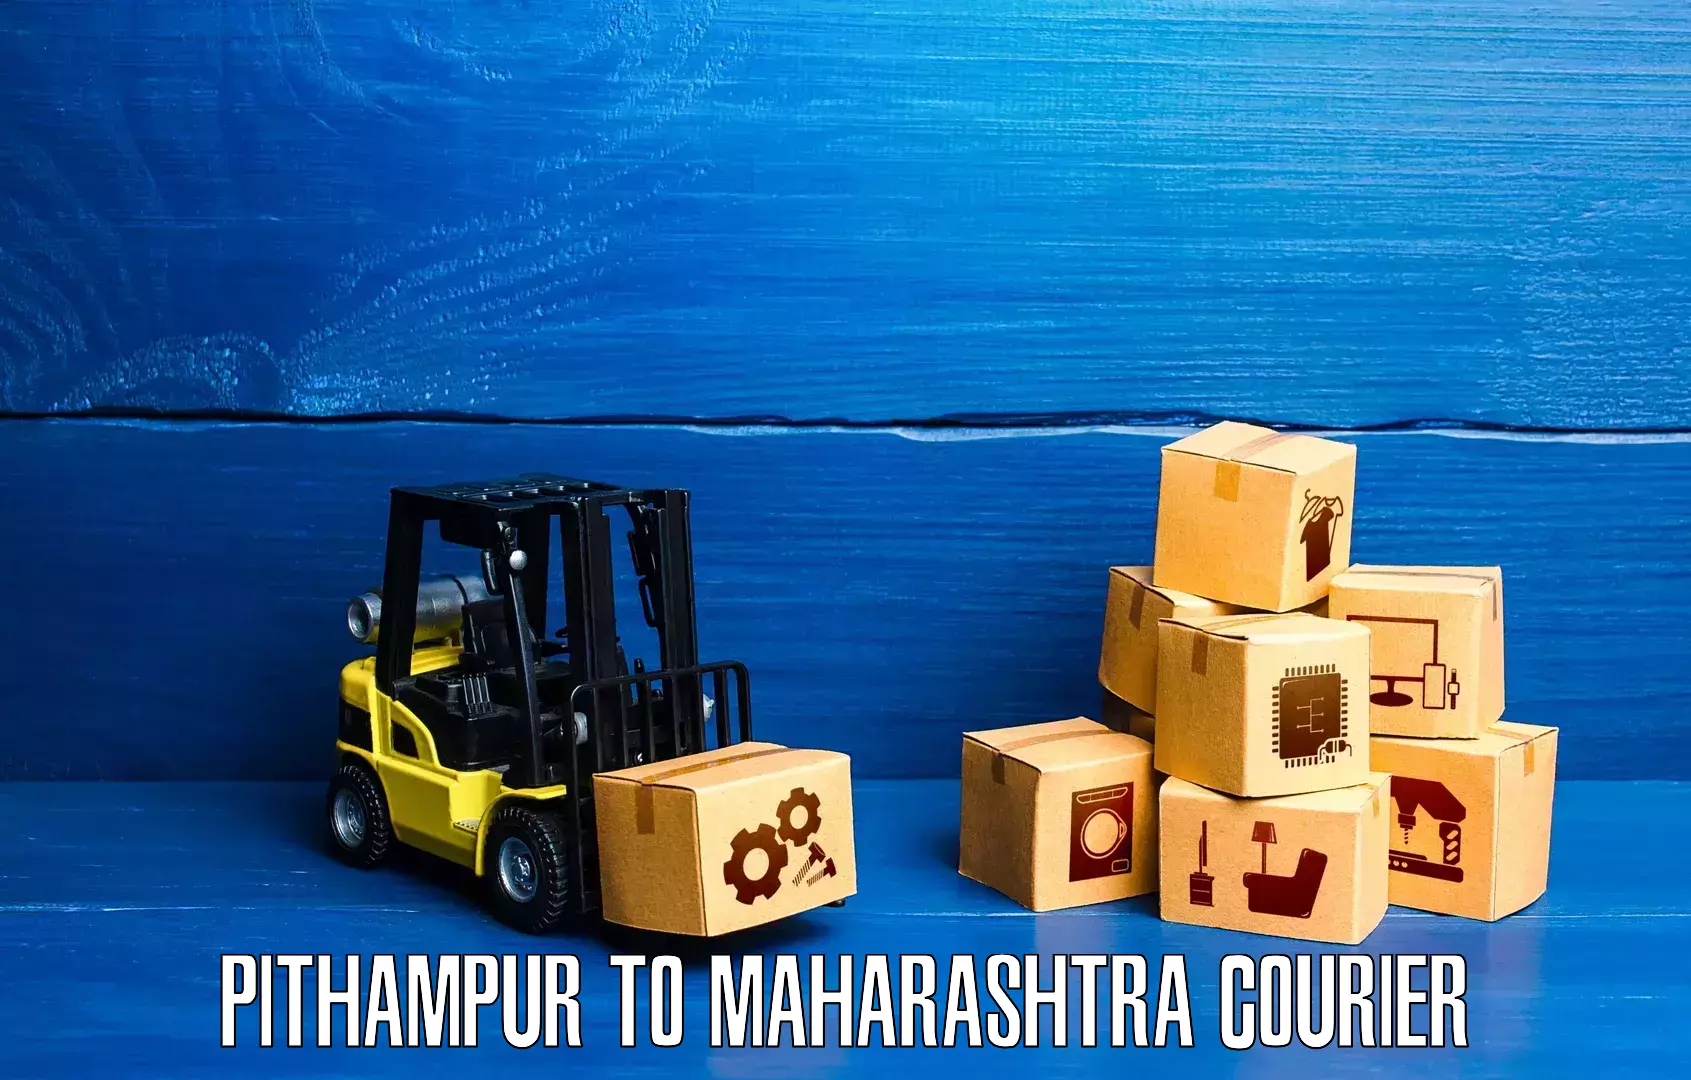 Package delivery network Pithampur to Maharashtra